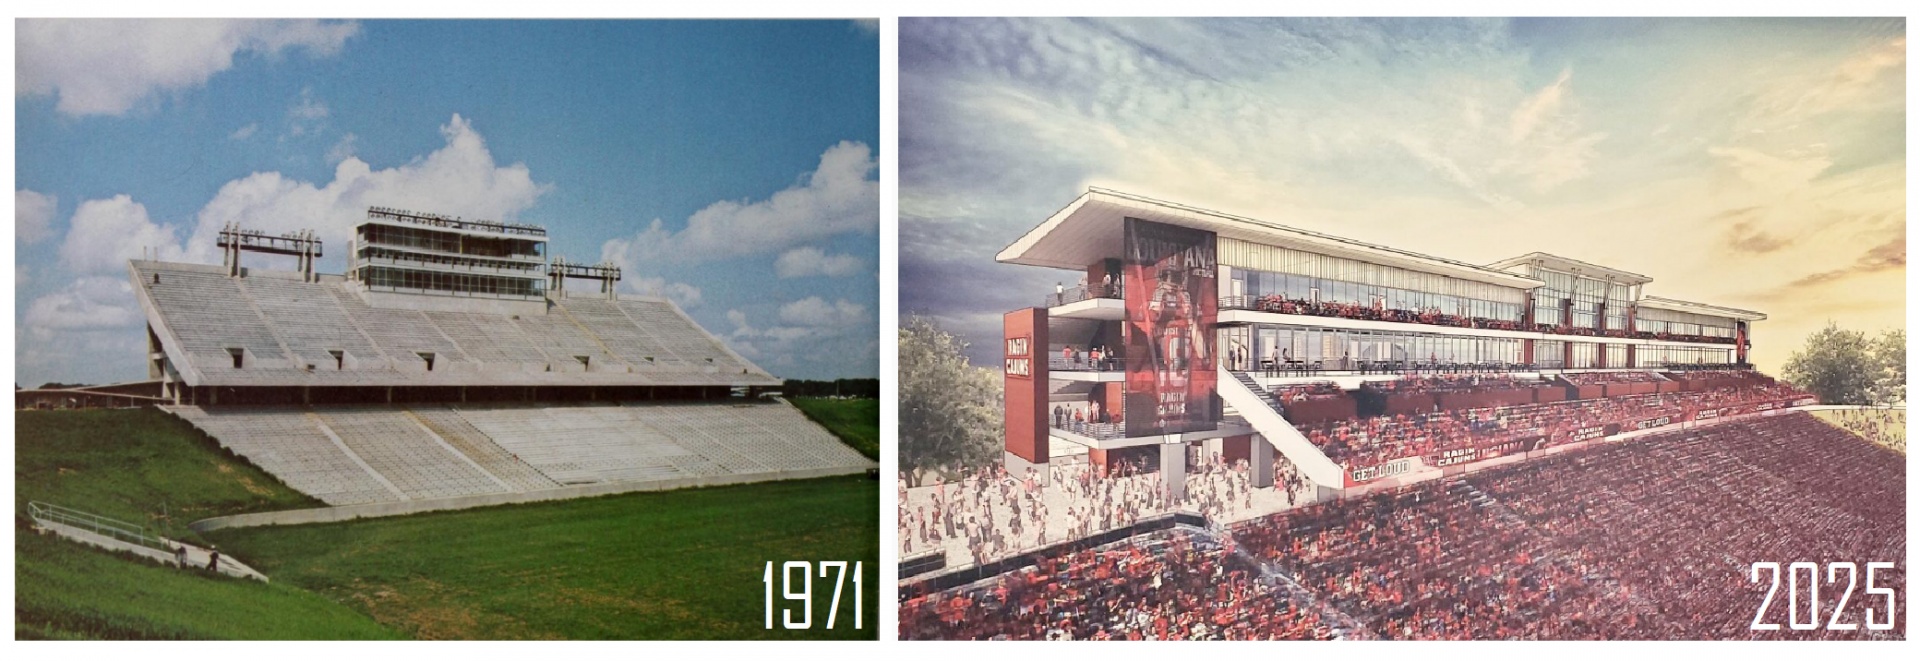 Name:  1971 Cajun Field_primary source image_LAcadien71 and 2025 projected improvements.jpg
Views: 289
Size:  432.6 KB